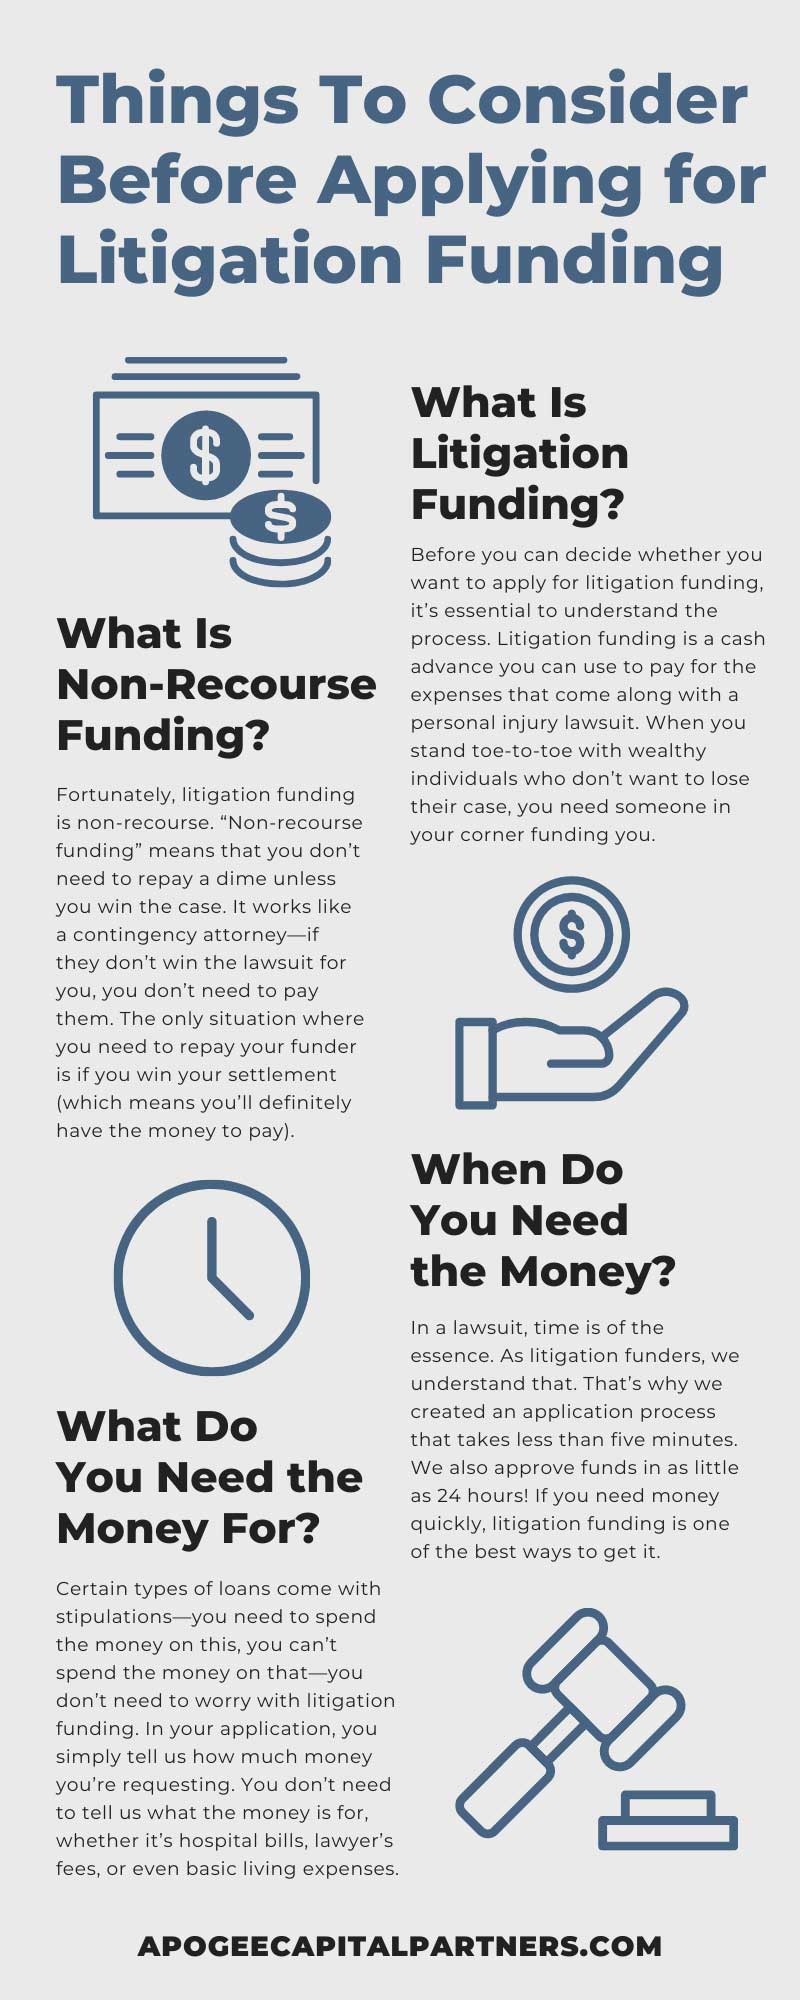 Things To Consider Before Applying for Litigation Funding